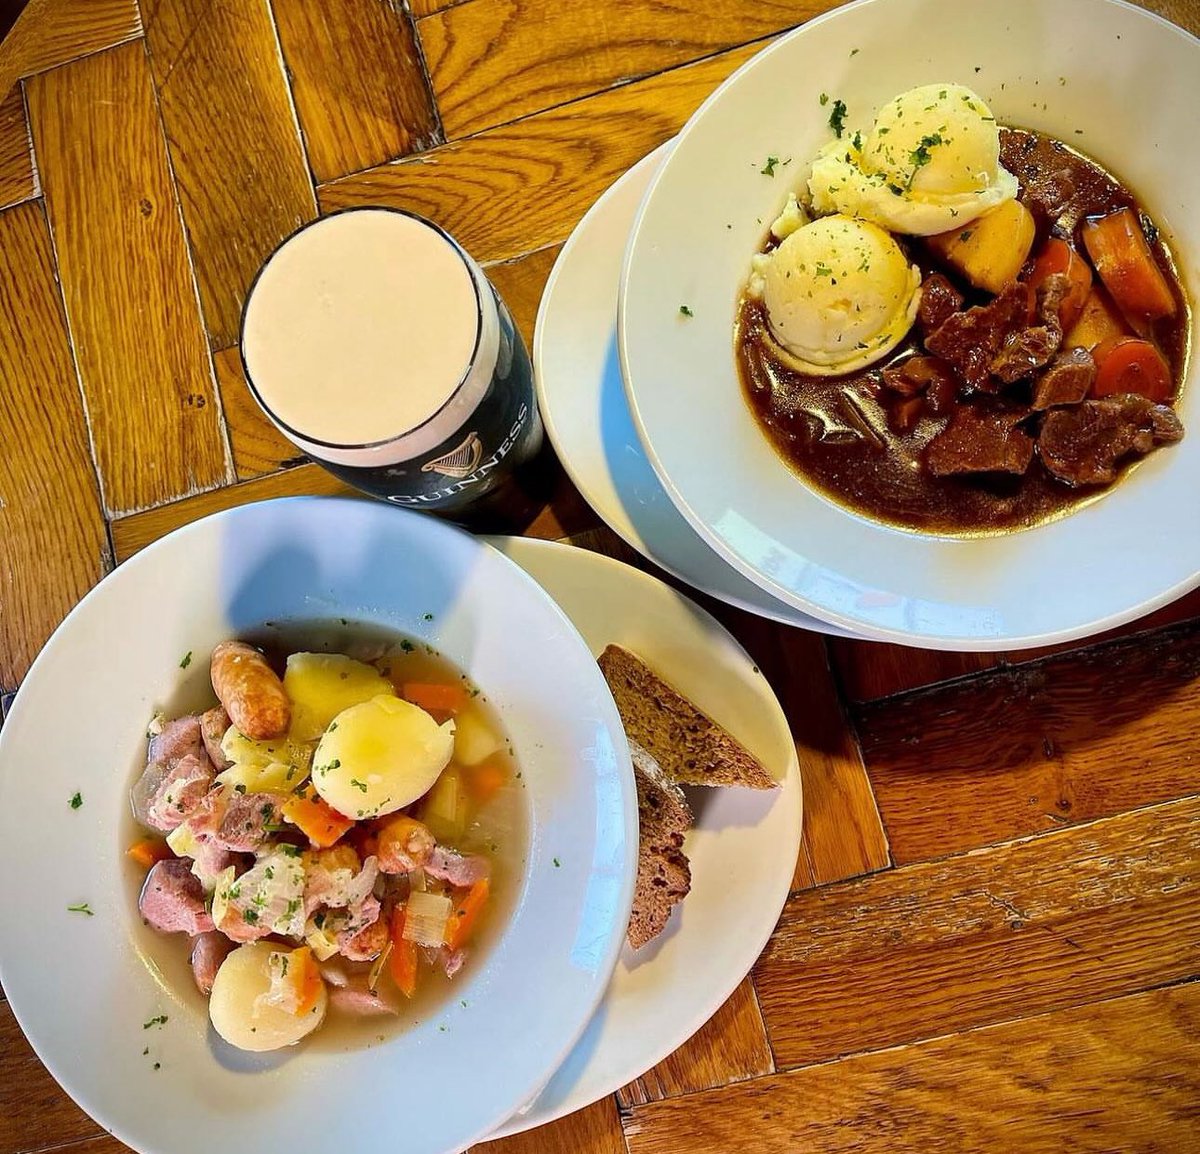 The Auld Dubliner Coddle or Beef & Guinness Stew? Which one are you having?

All Day Menu Served Daily from 12pm - 9pm

#theaulddubliner #pub #templebar #dublin #dublinpubs #coddle #beefandguinnessstew